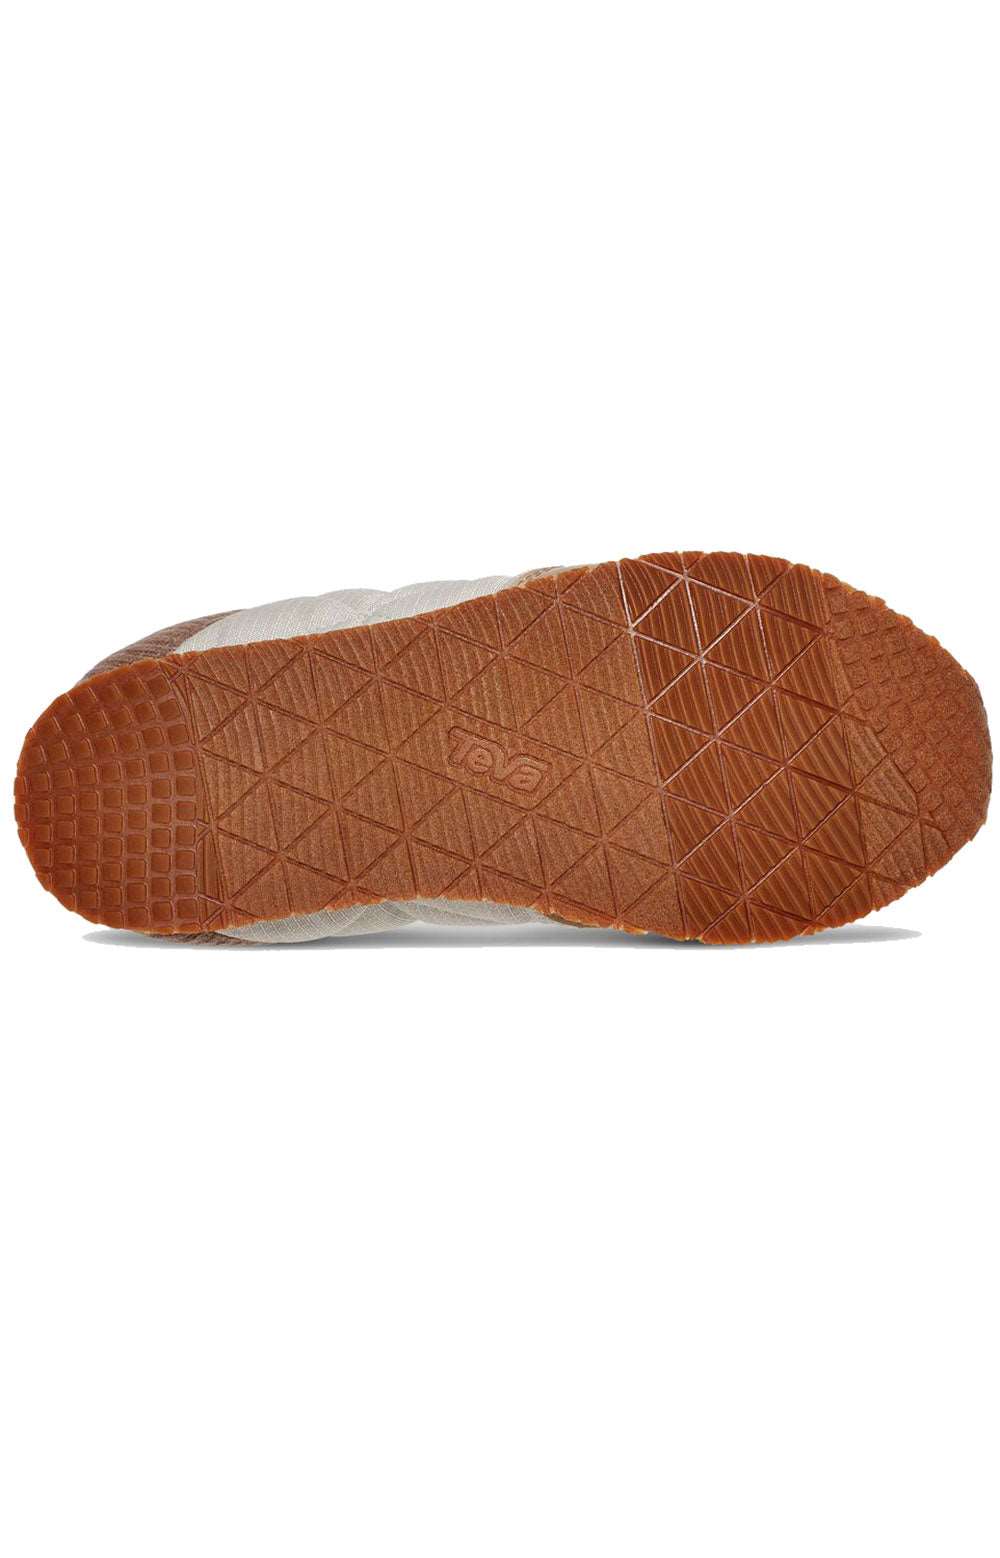 (1125471) ReEMBER Moccasins - Neutral Multi